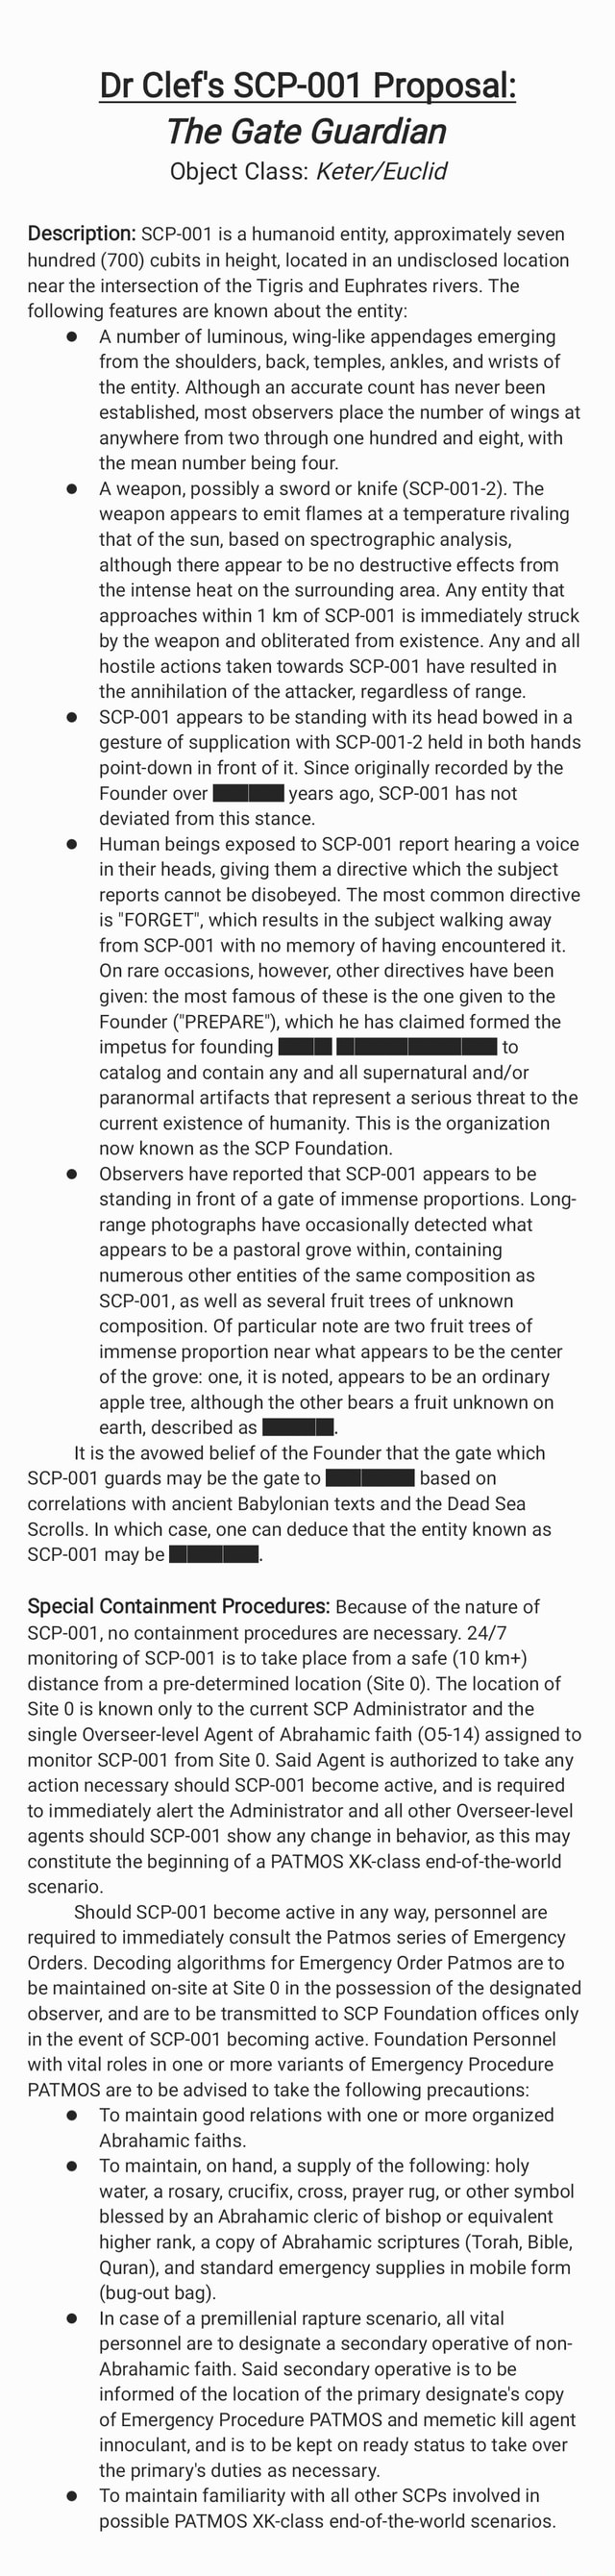 The SCP Foundation on X: The most famous of SCP-001 proposals is The Gate  Guardian: an angelic, fiery being who guards the supposed Garden of Eden.  The article tells of the beginning